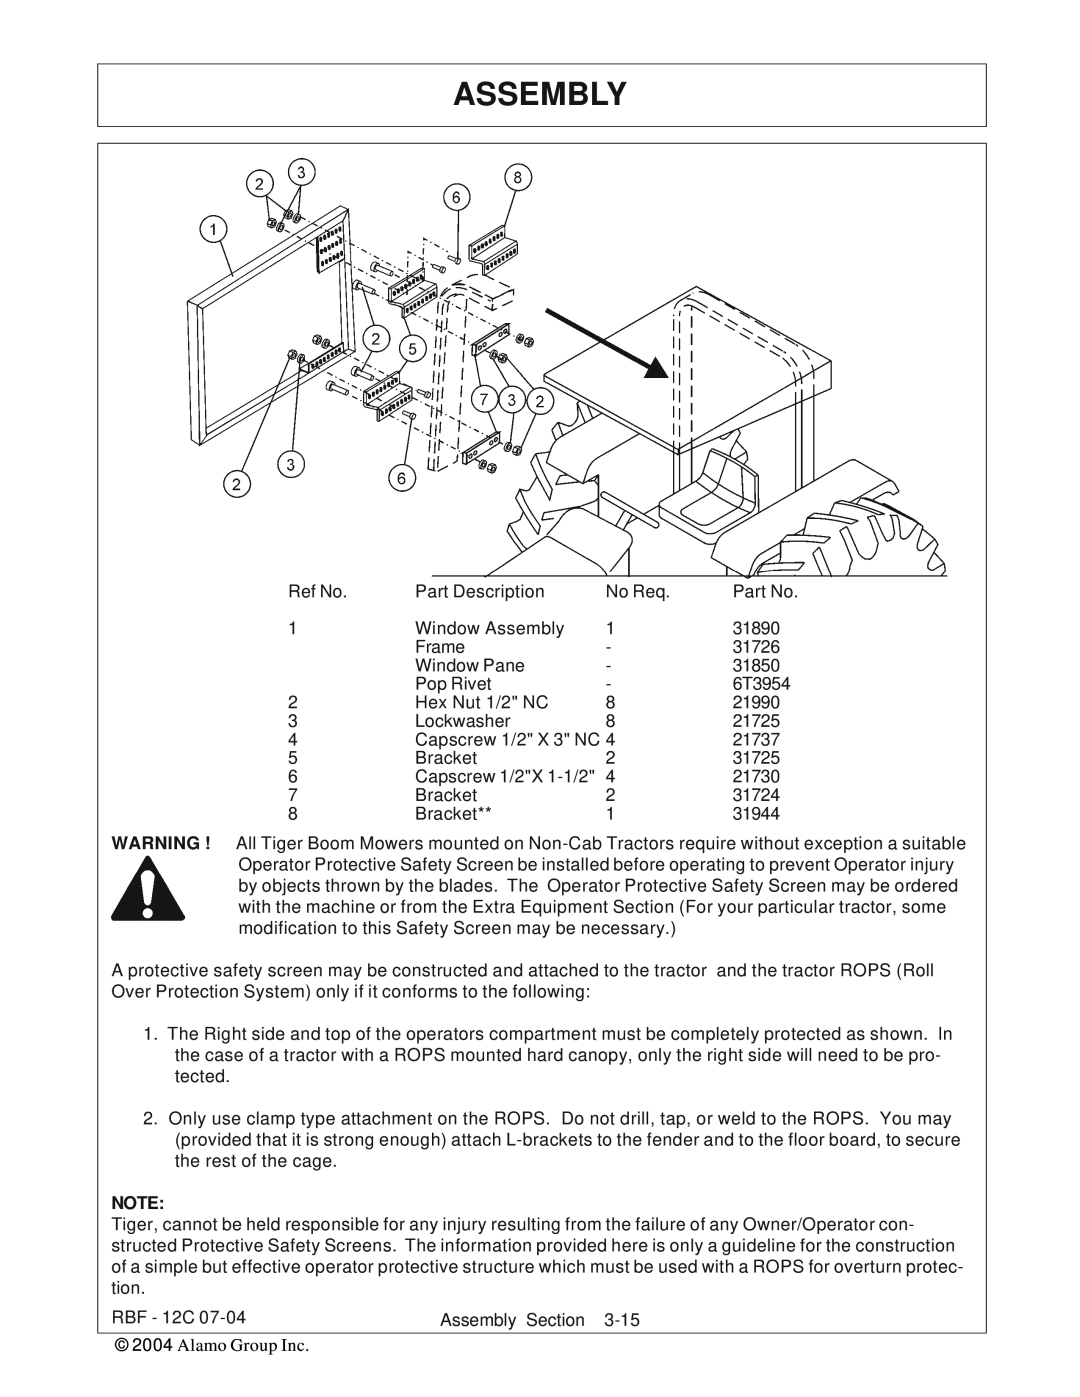 Tiger Products Co., Ltd RBF-12C manual Assembly, Ref No 